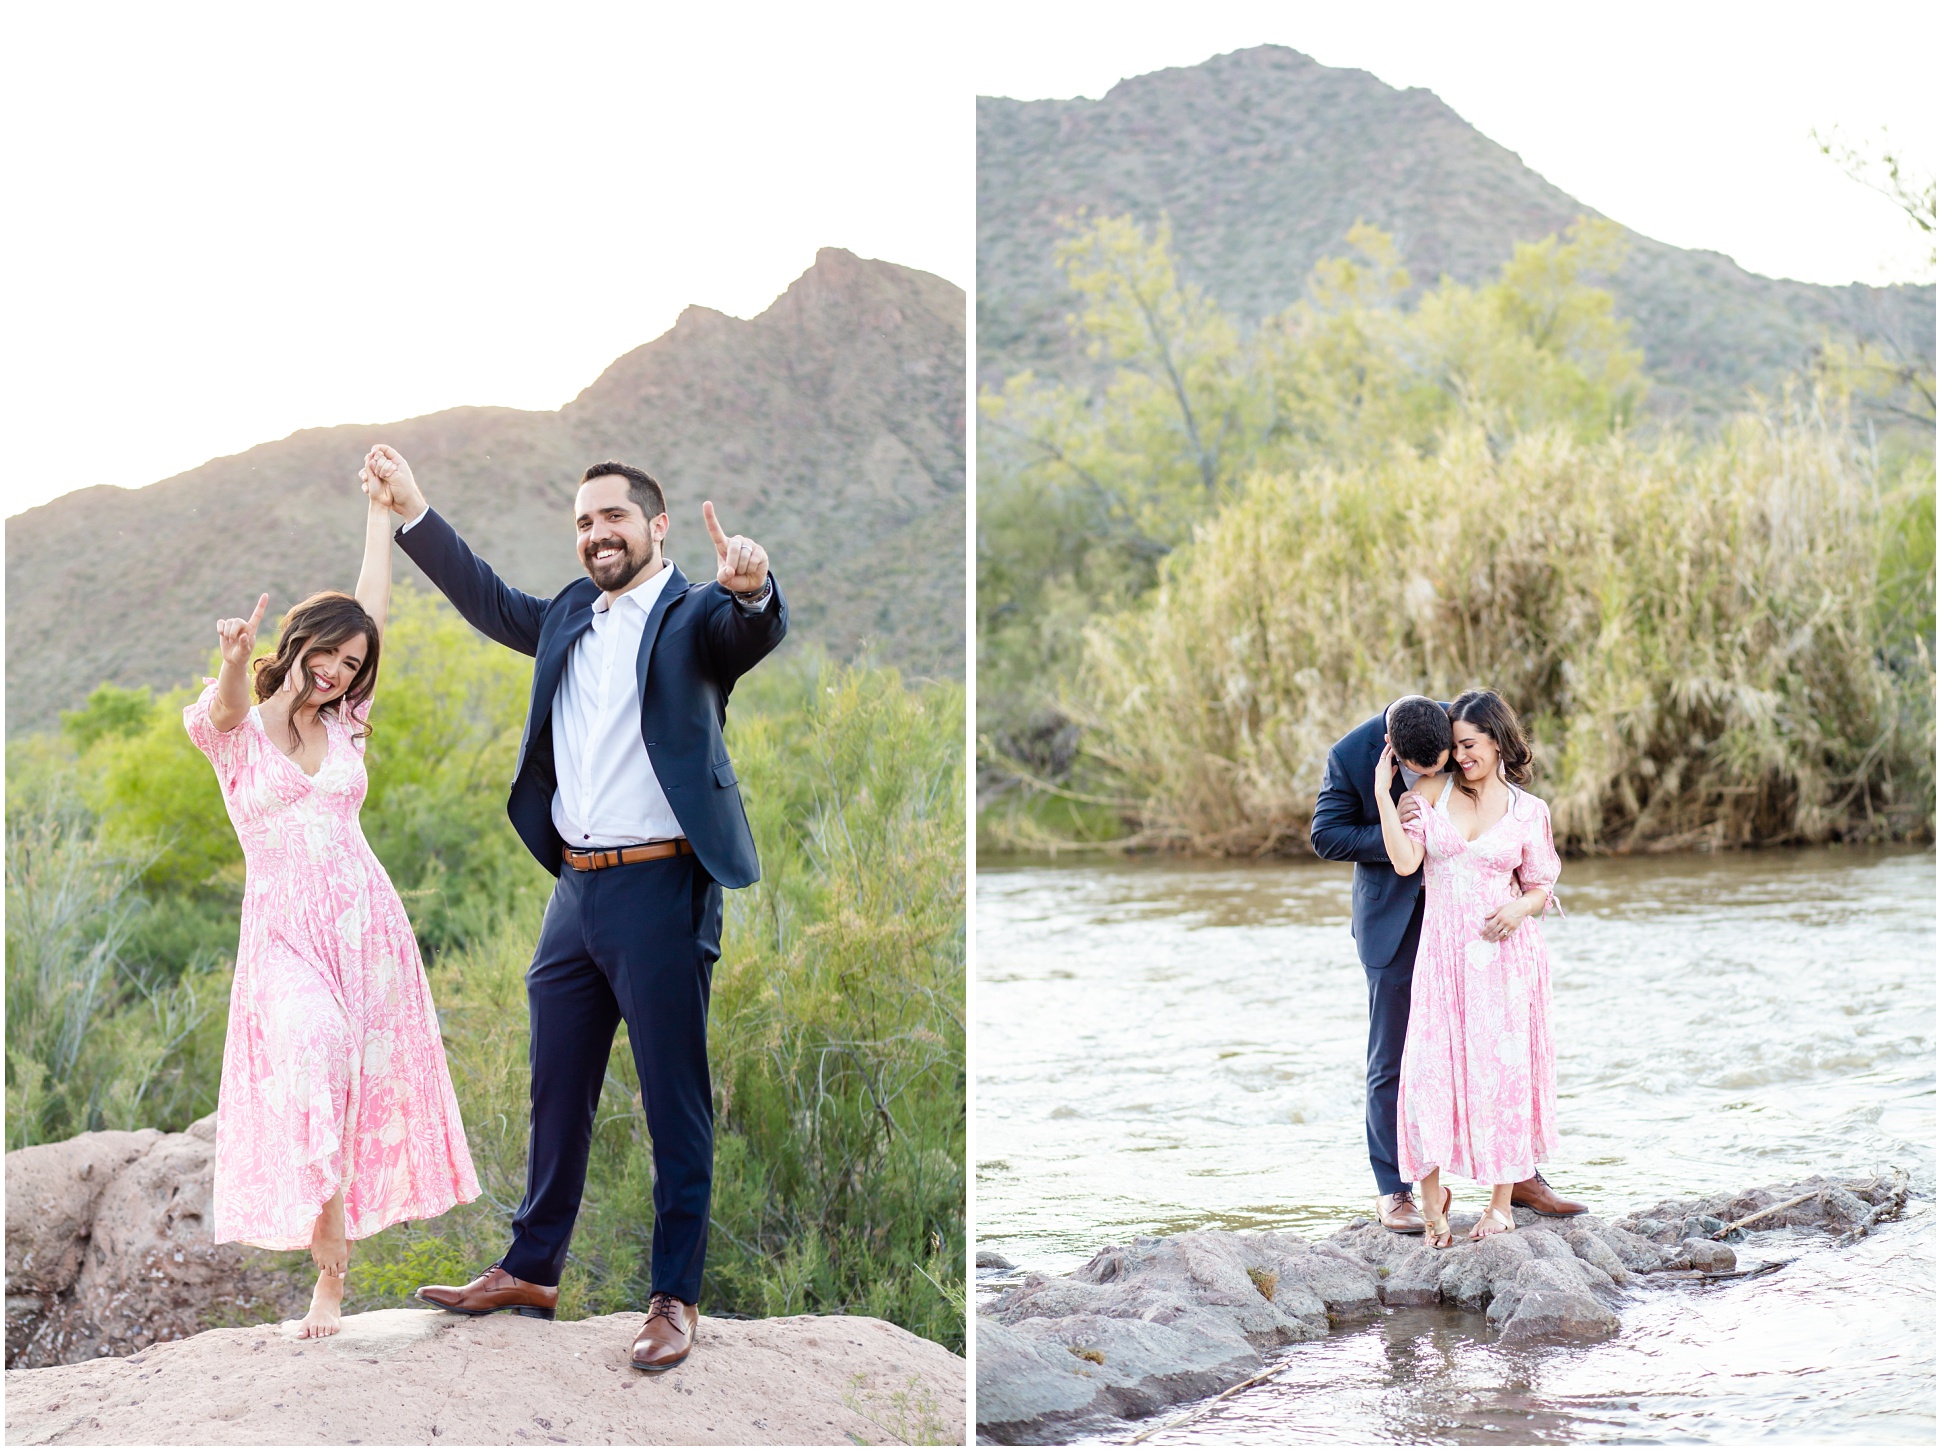 Two images of Paul and Anette De La Rosa celebrating their one year anniversary at the salt river